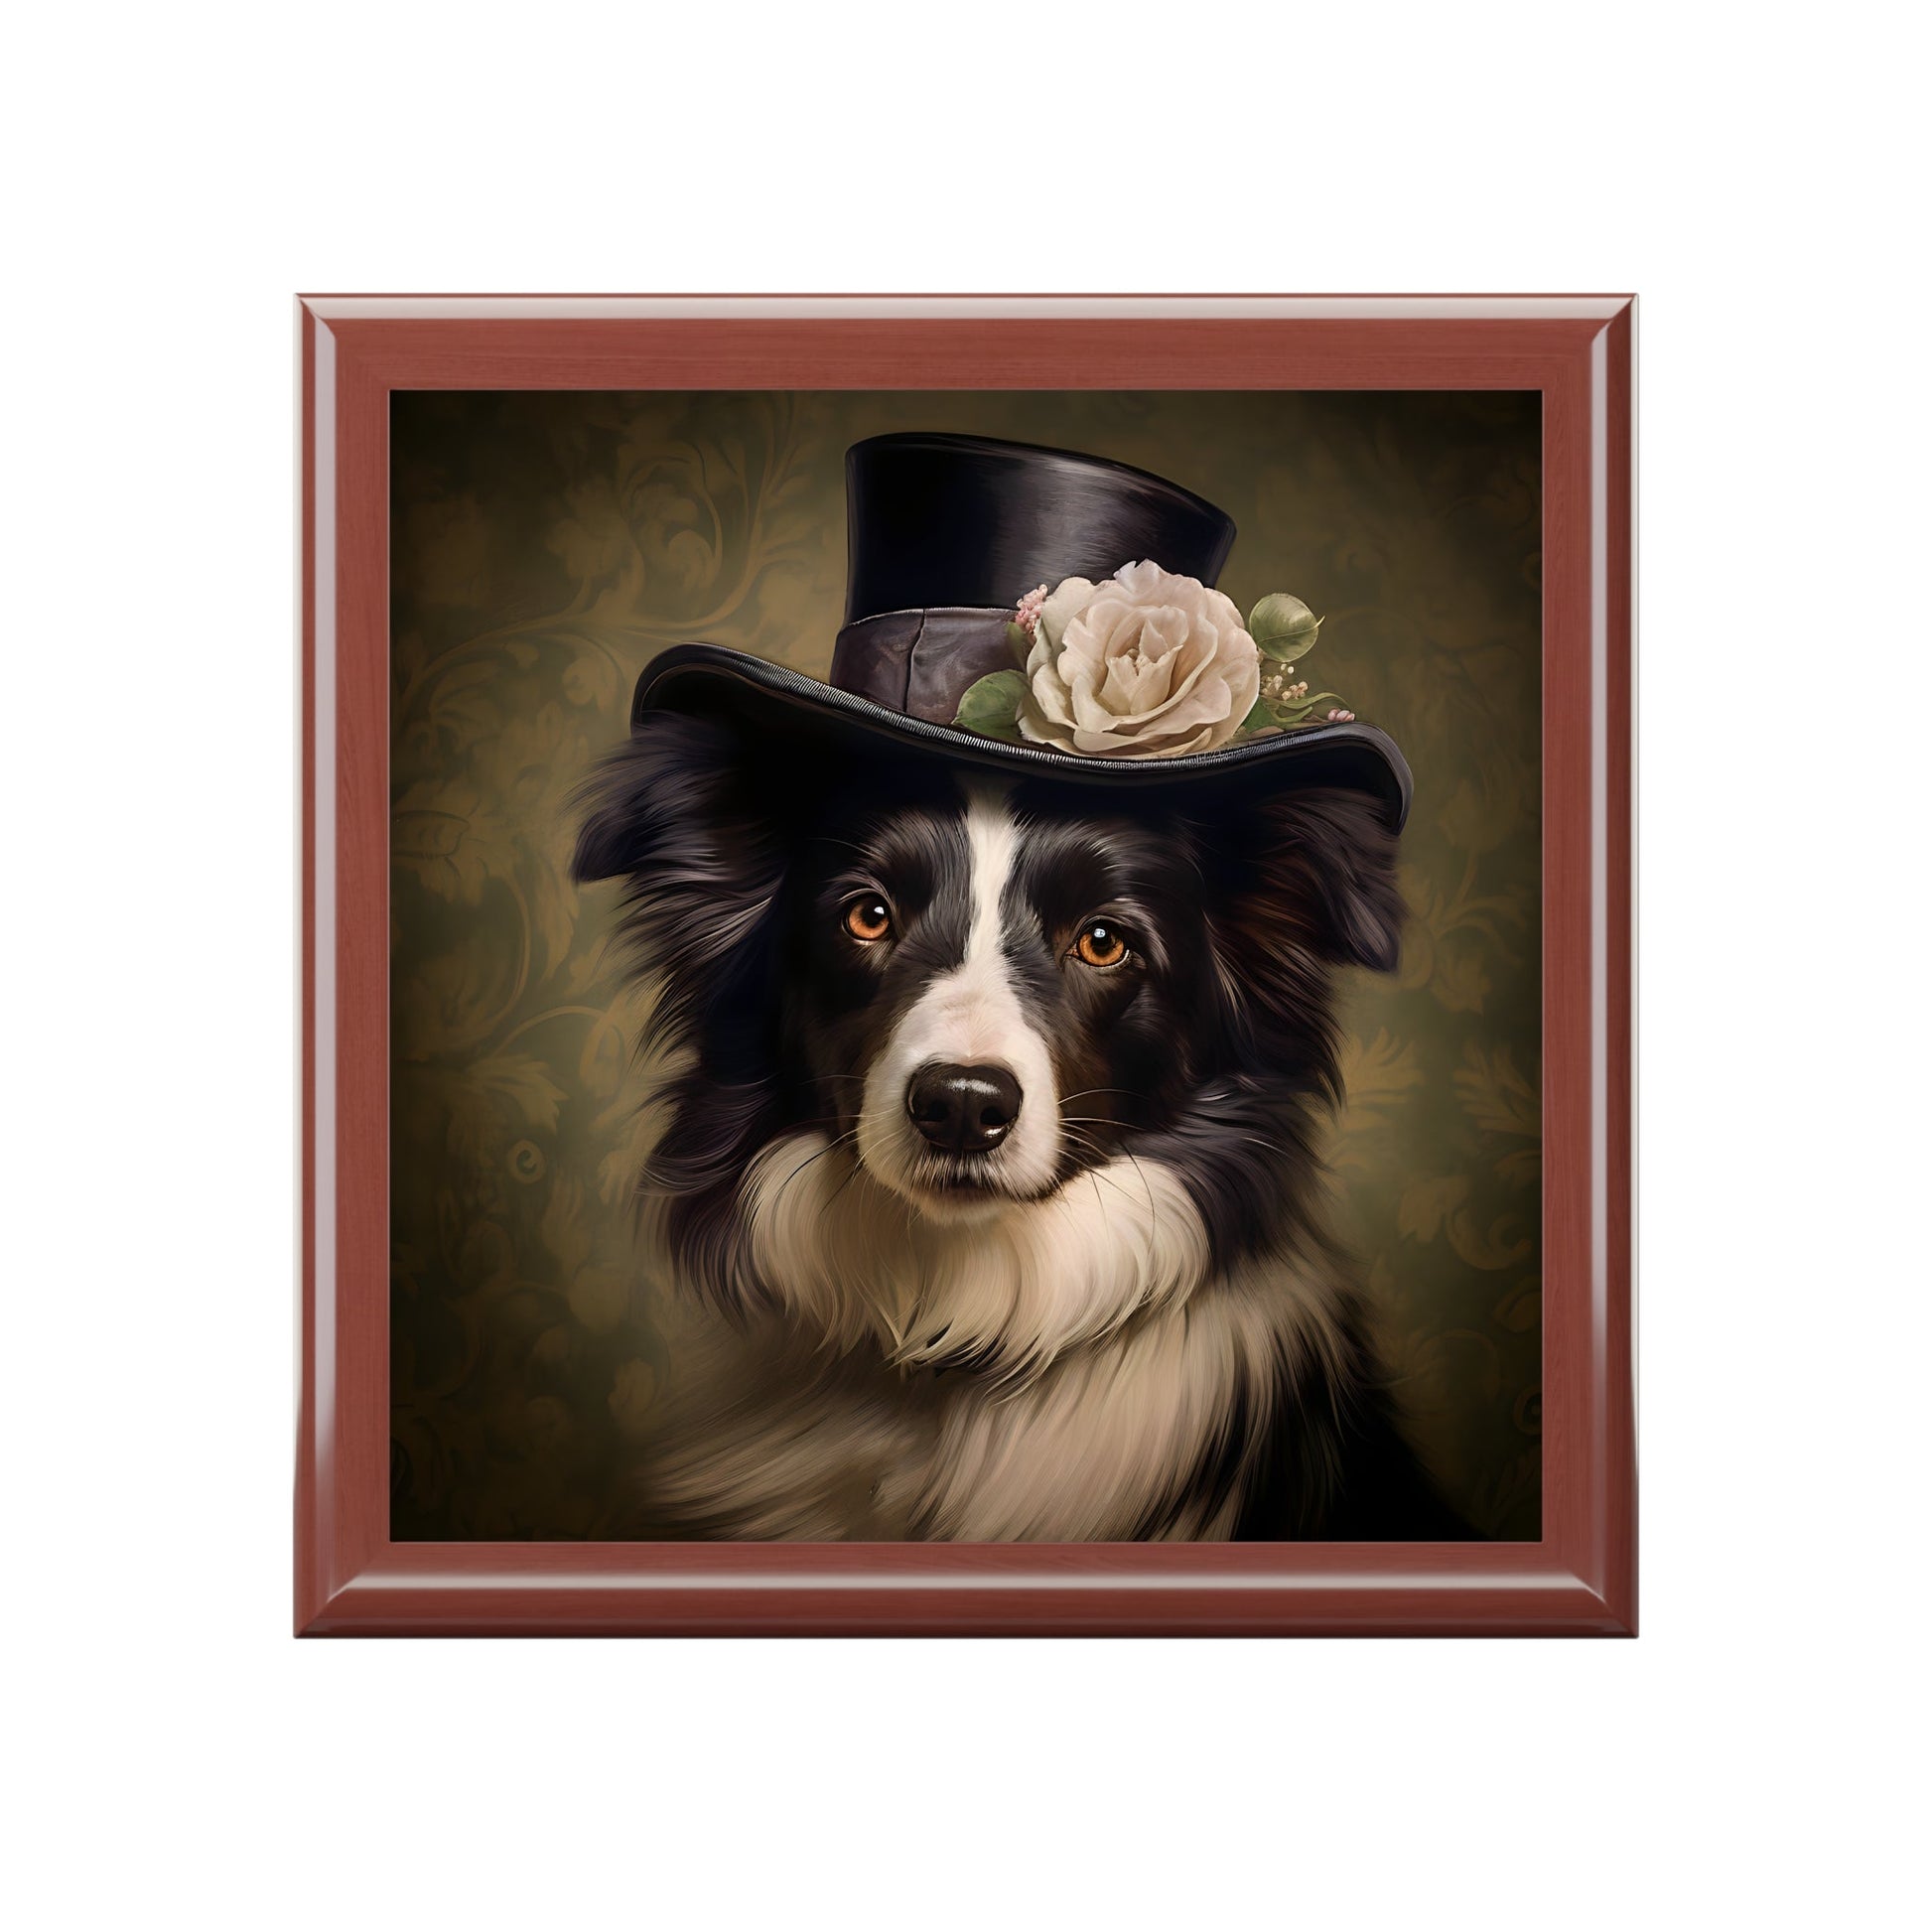 Lady Border Collie in New Hat Art Print Gift and Jewelry Box